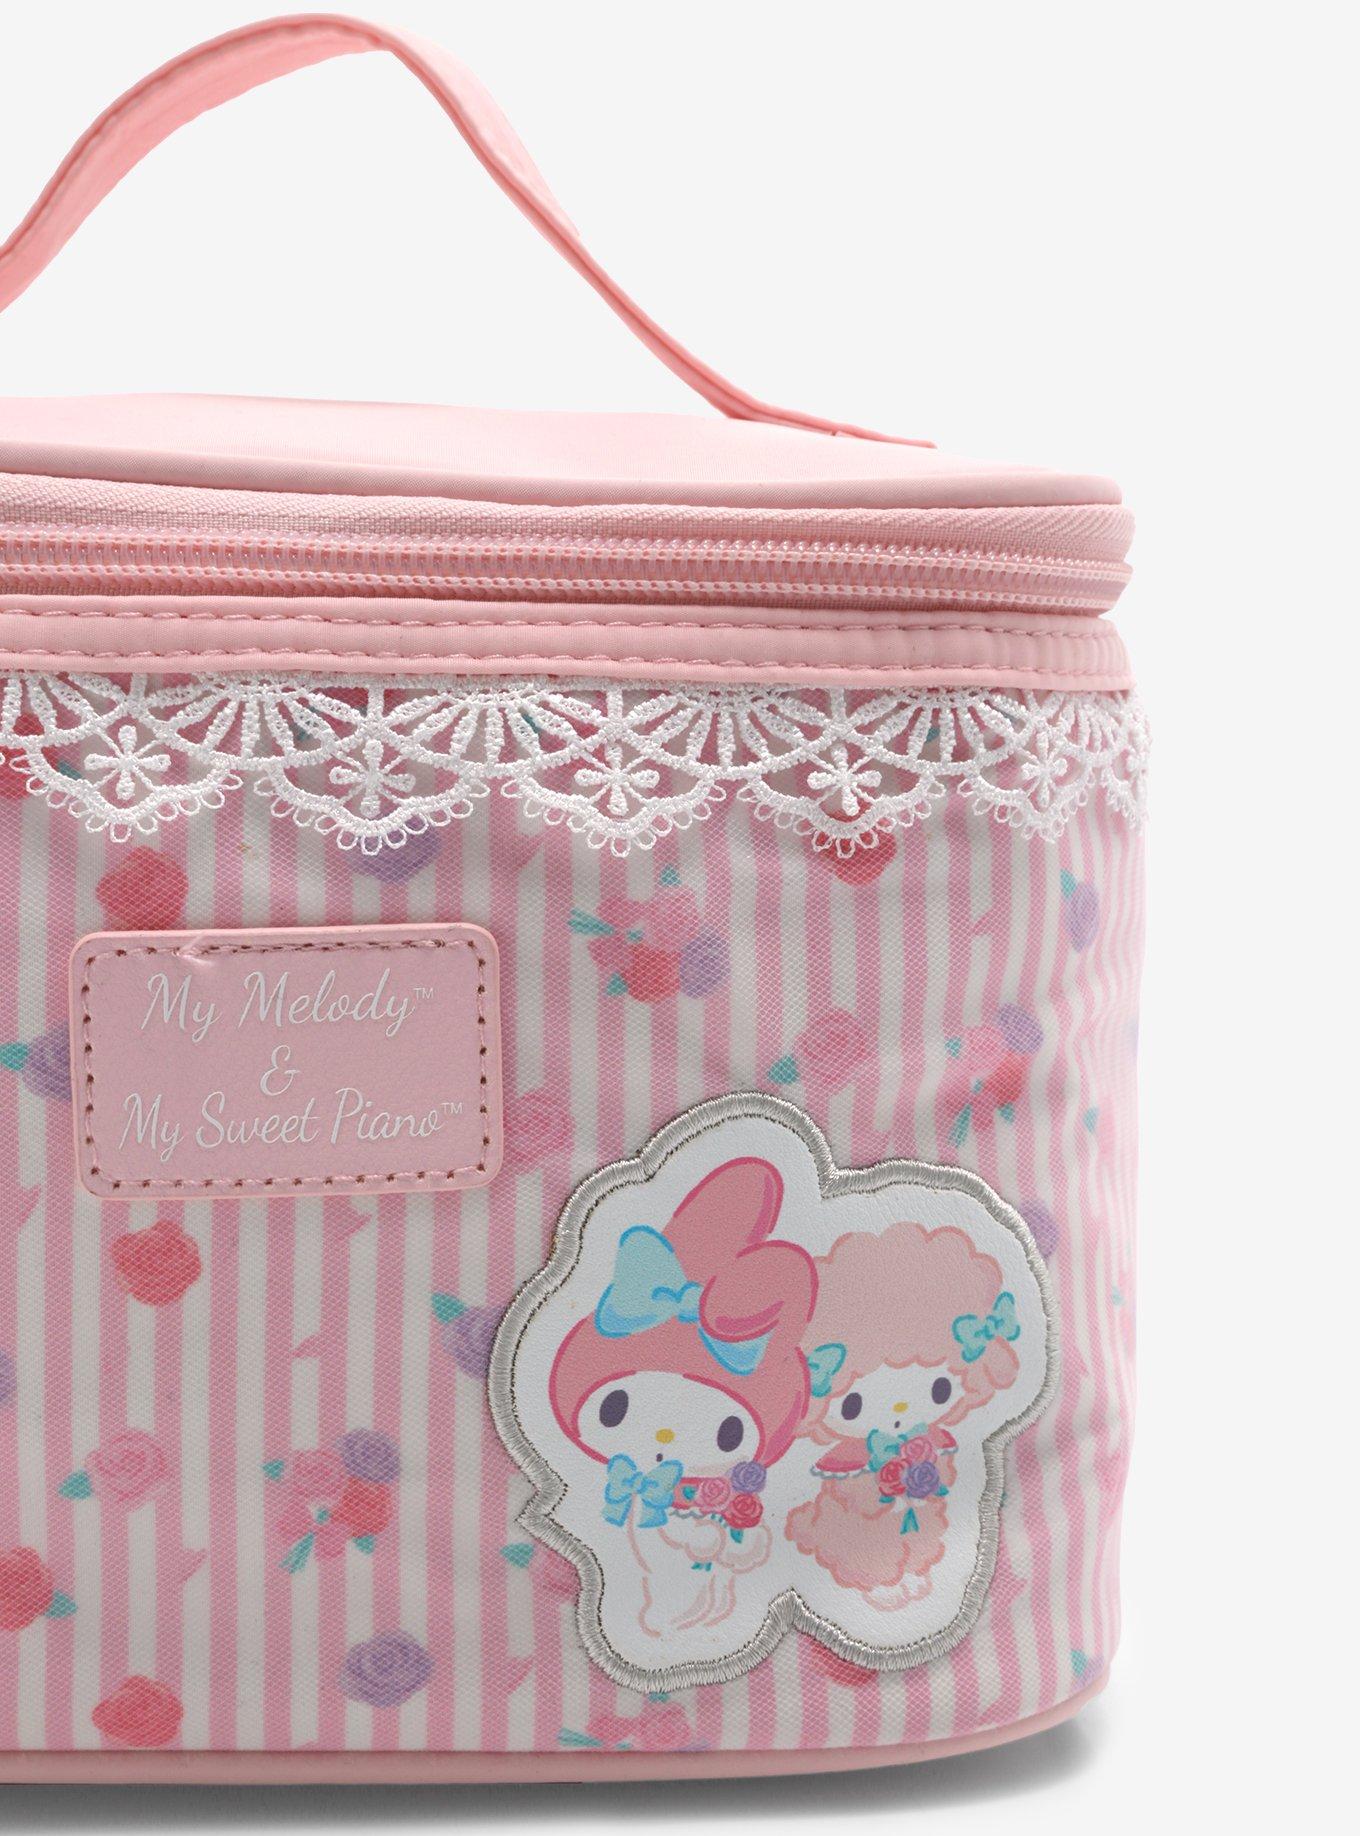 My Melody & My Sweet Piano Lace Makeup Bag, , alternate